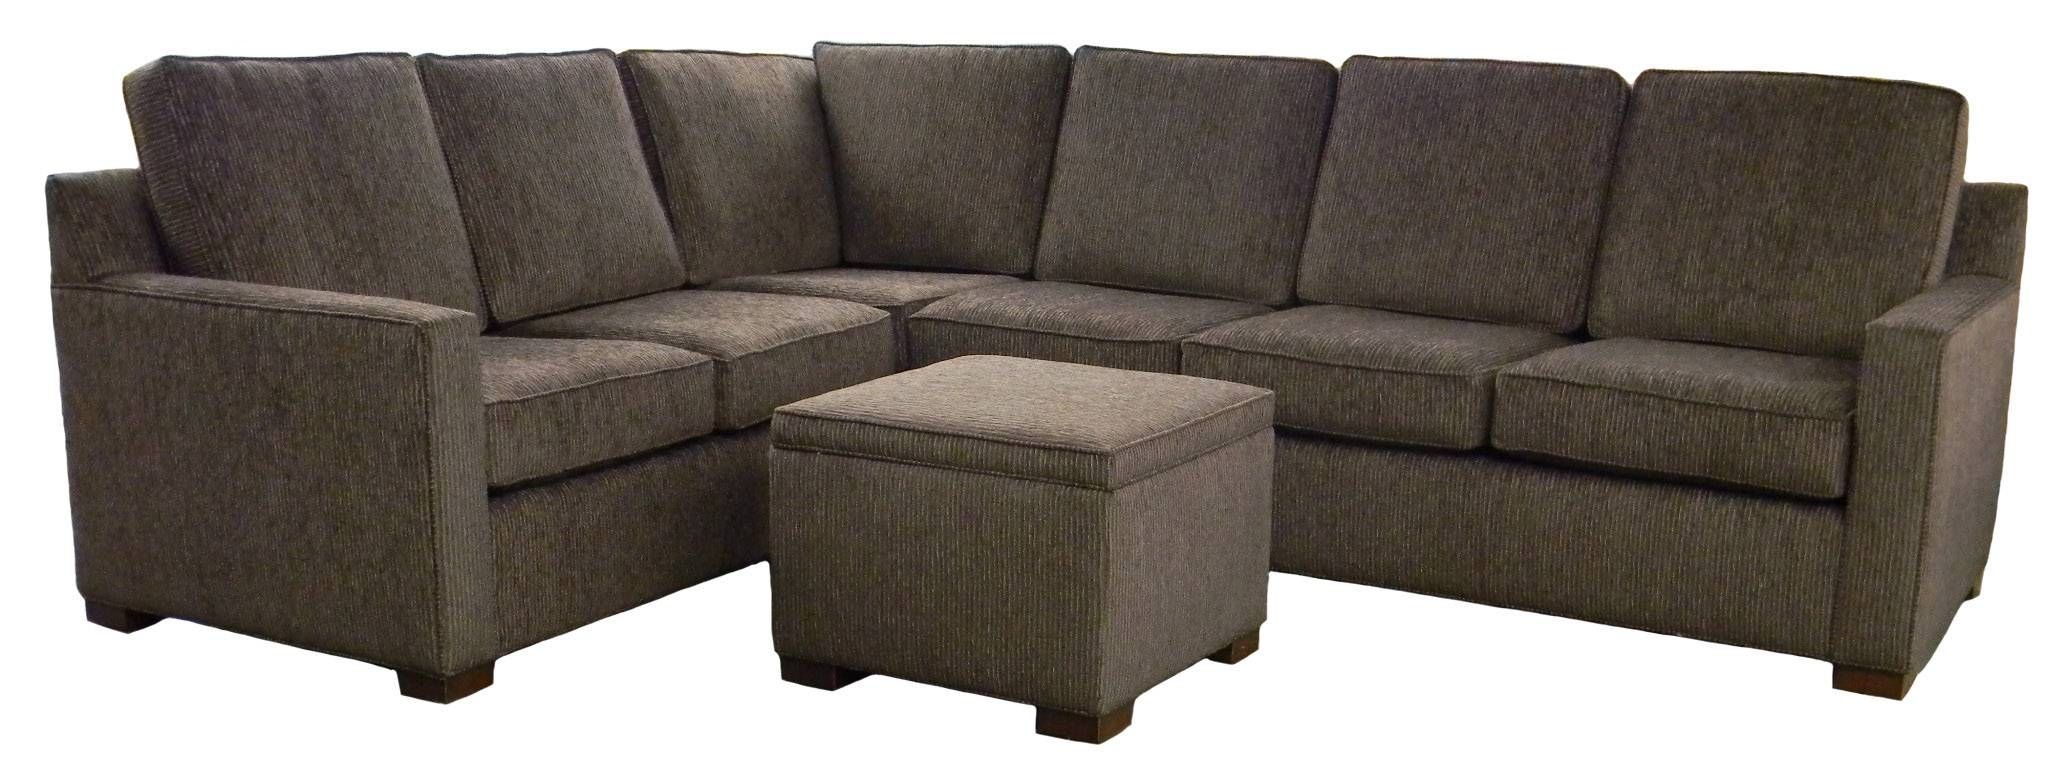 New Short Sectional Sofa 96 With Additional Sectional Sofa Under Throughout Short Sofas (View 6 of 15)